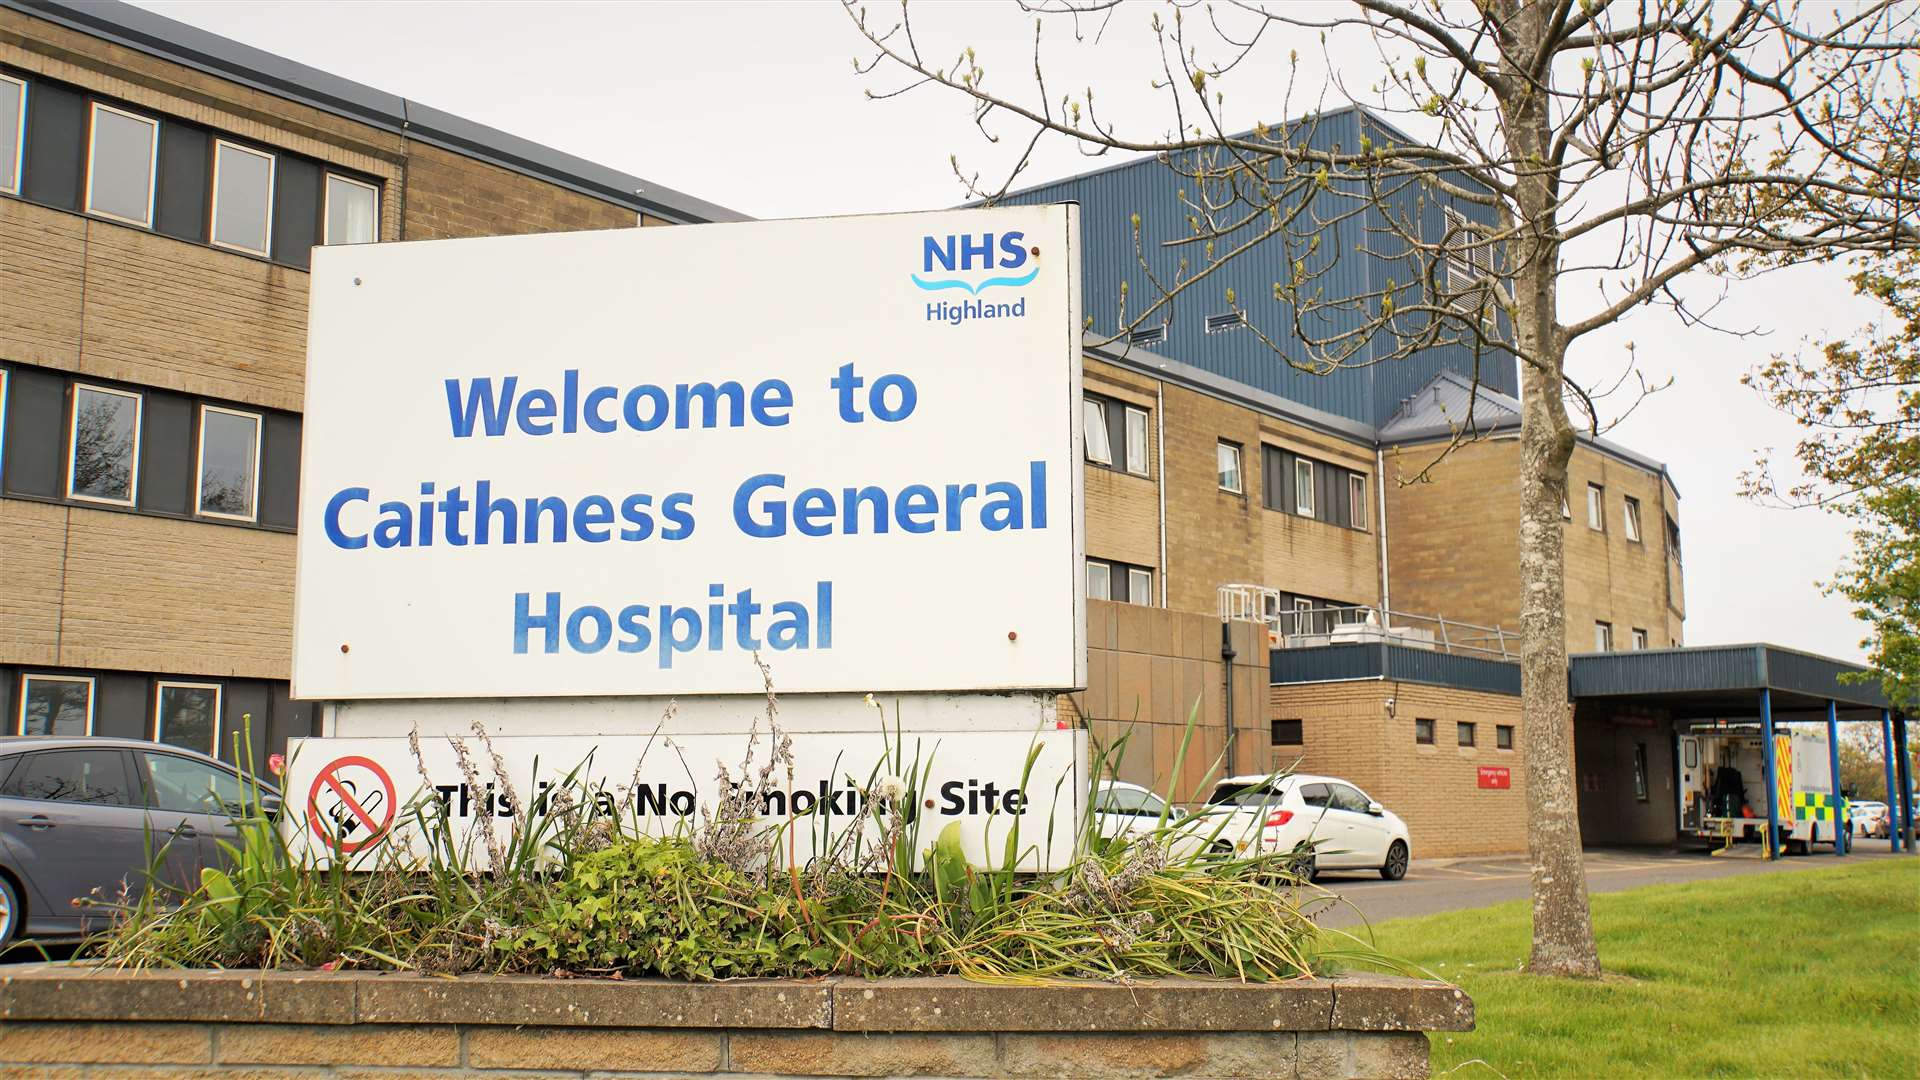 The award-winning research was undertaken at Caithness General Hospital in Wick